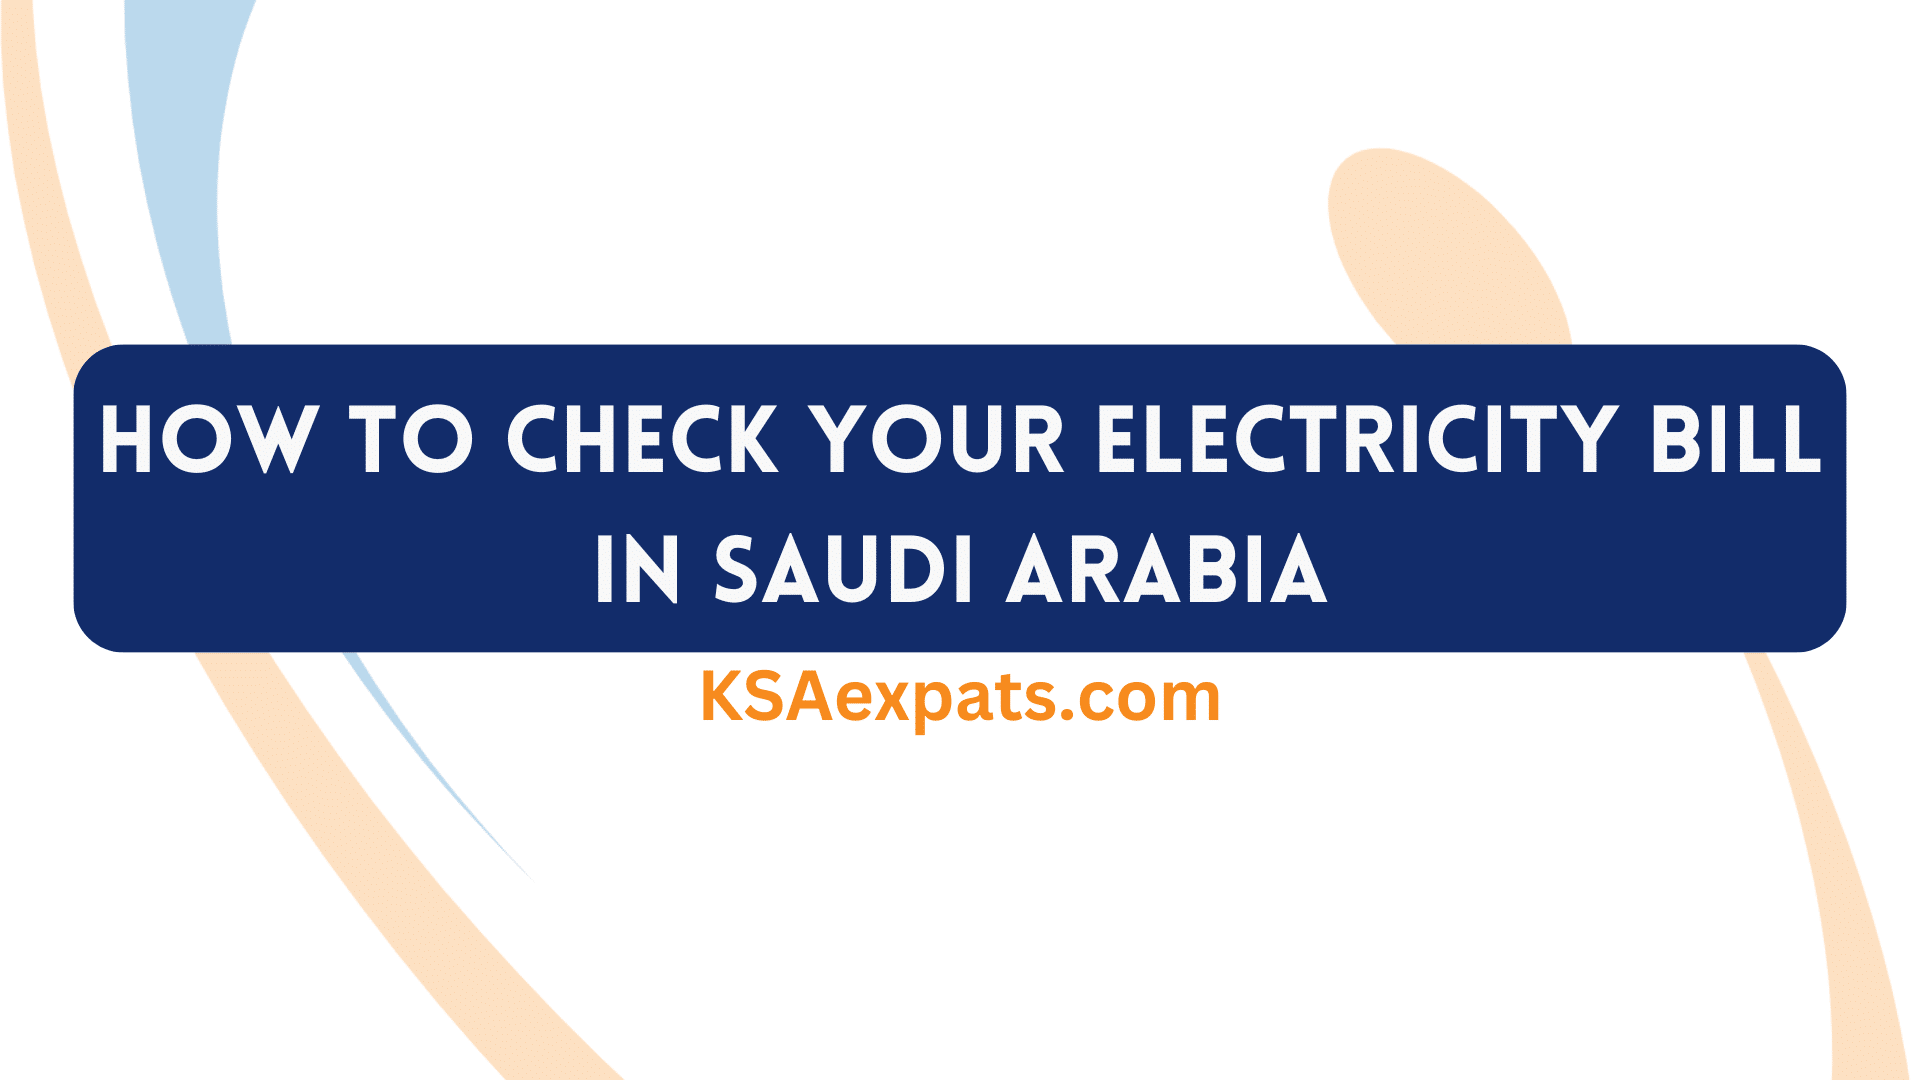 ow to Check Your Electricity Bill in Saudi Arabia